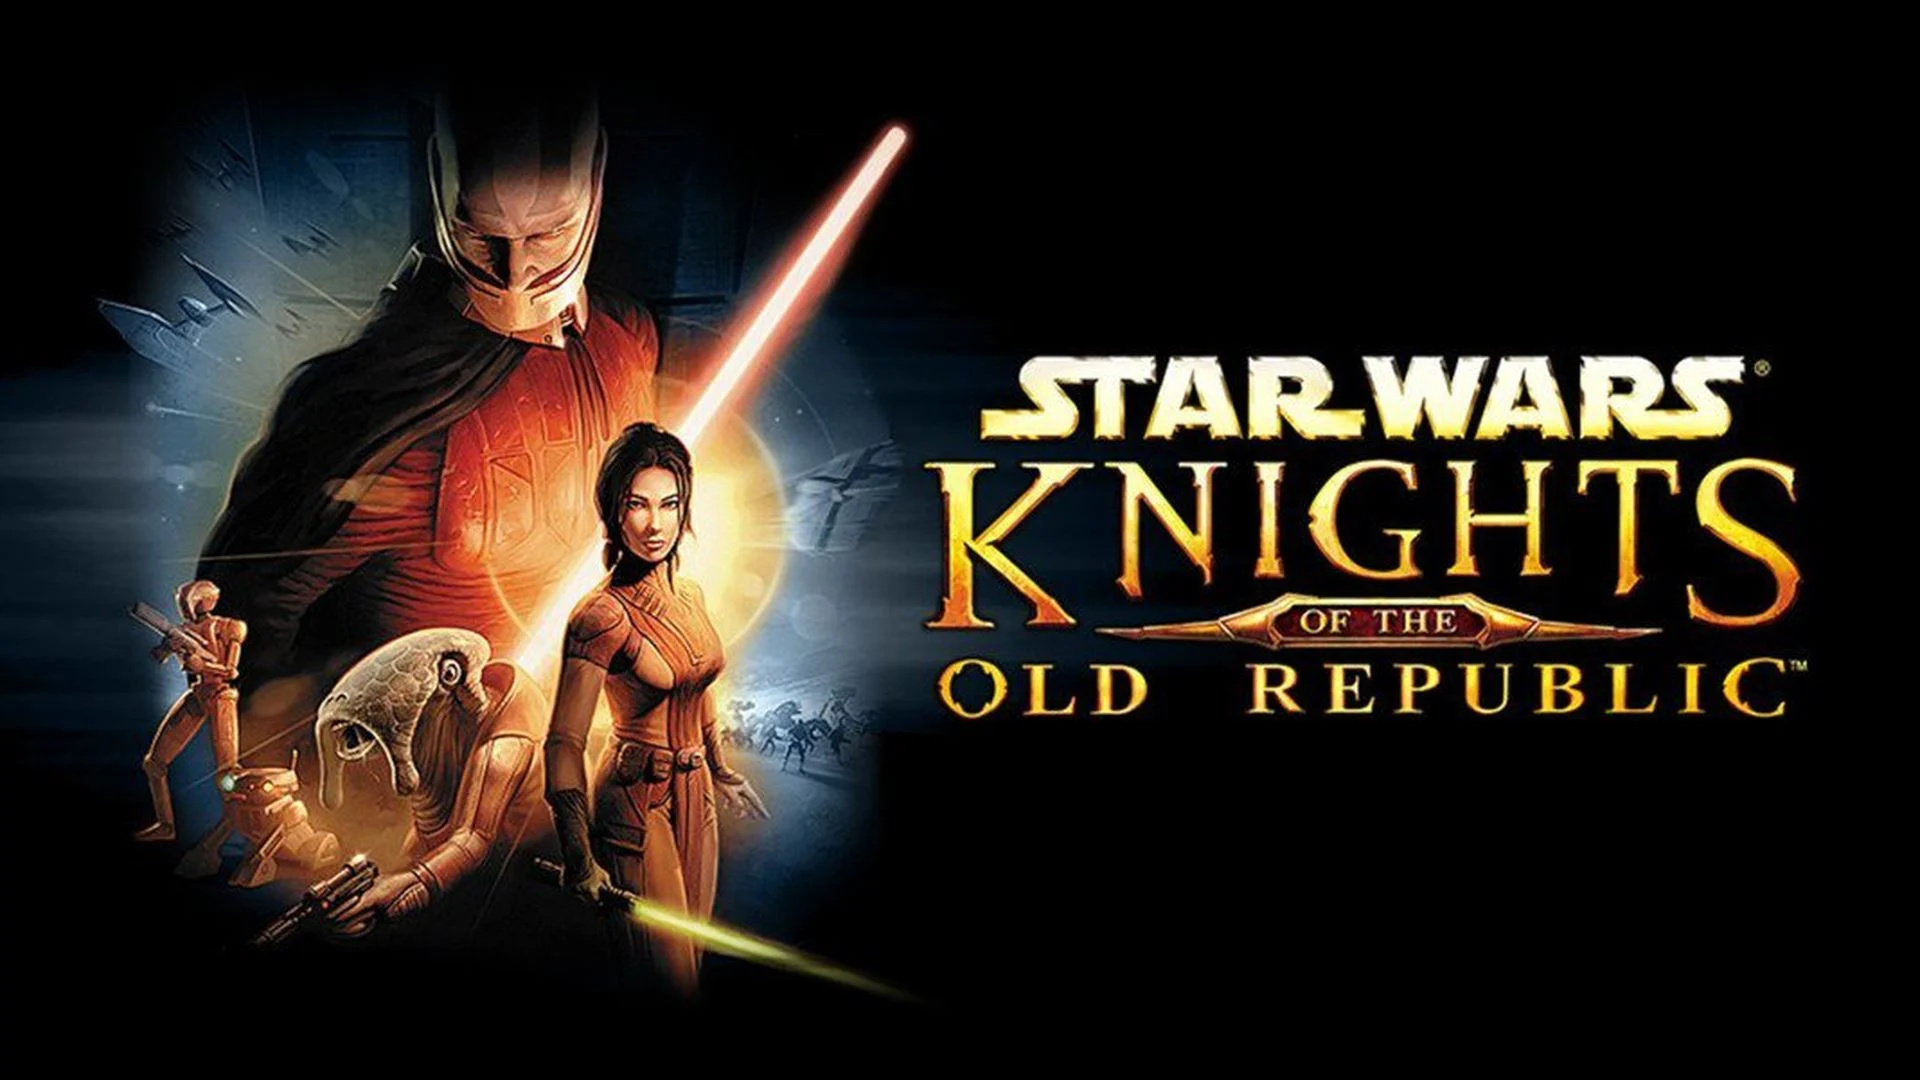 Retro game review, Star Wars Knights of the Old Republic, Nostalgic experience, Gaming journey, 1920x1080 Full HD Desktop